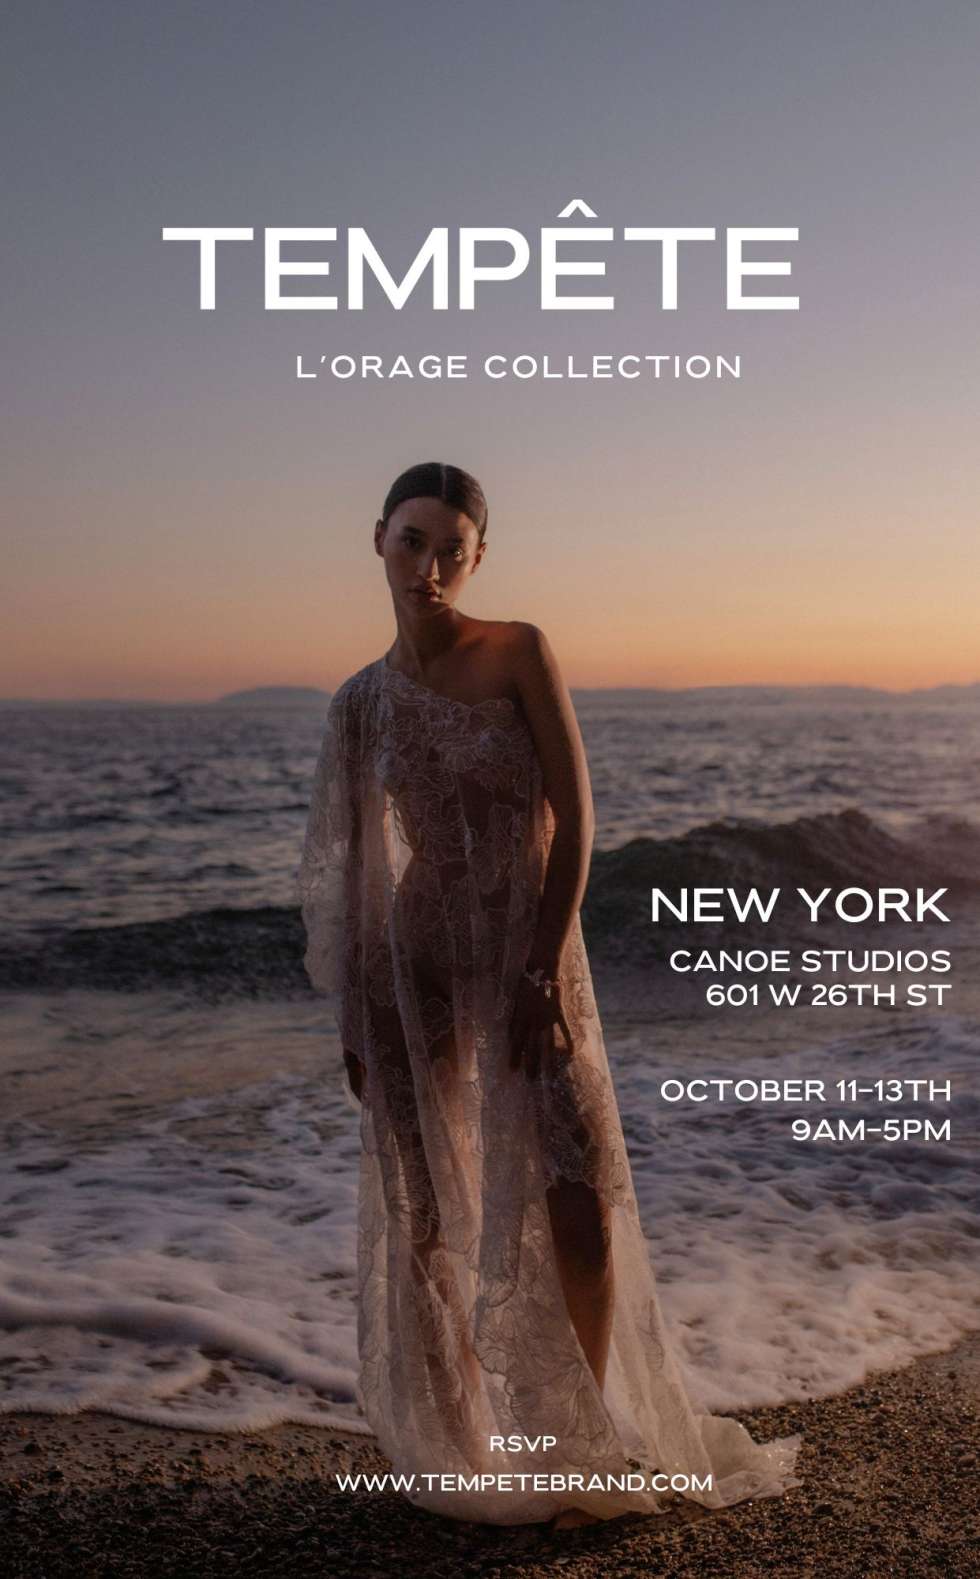  Tempête l’Orage Collection to Be Presented During NYBFW